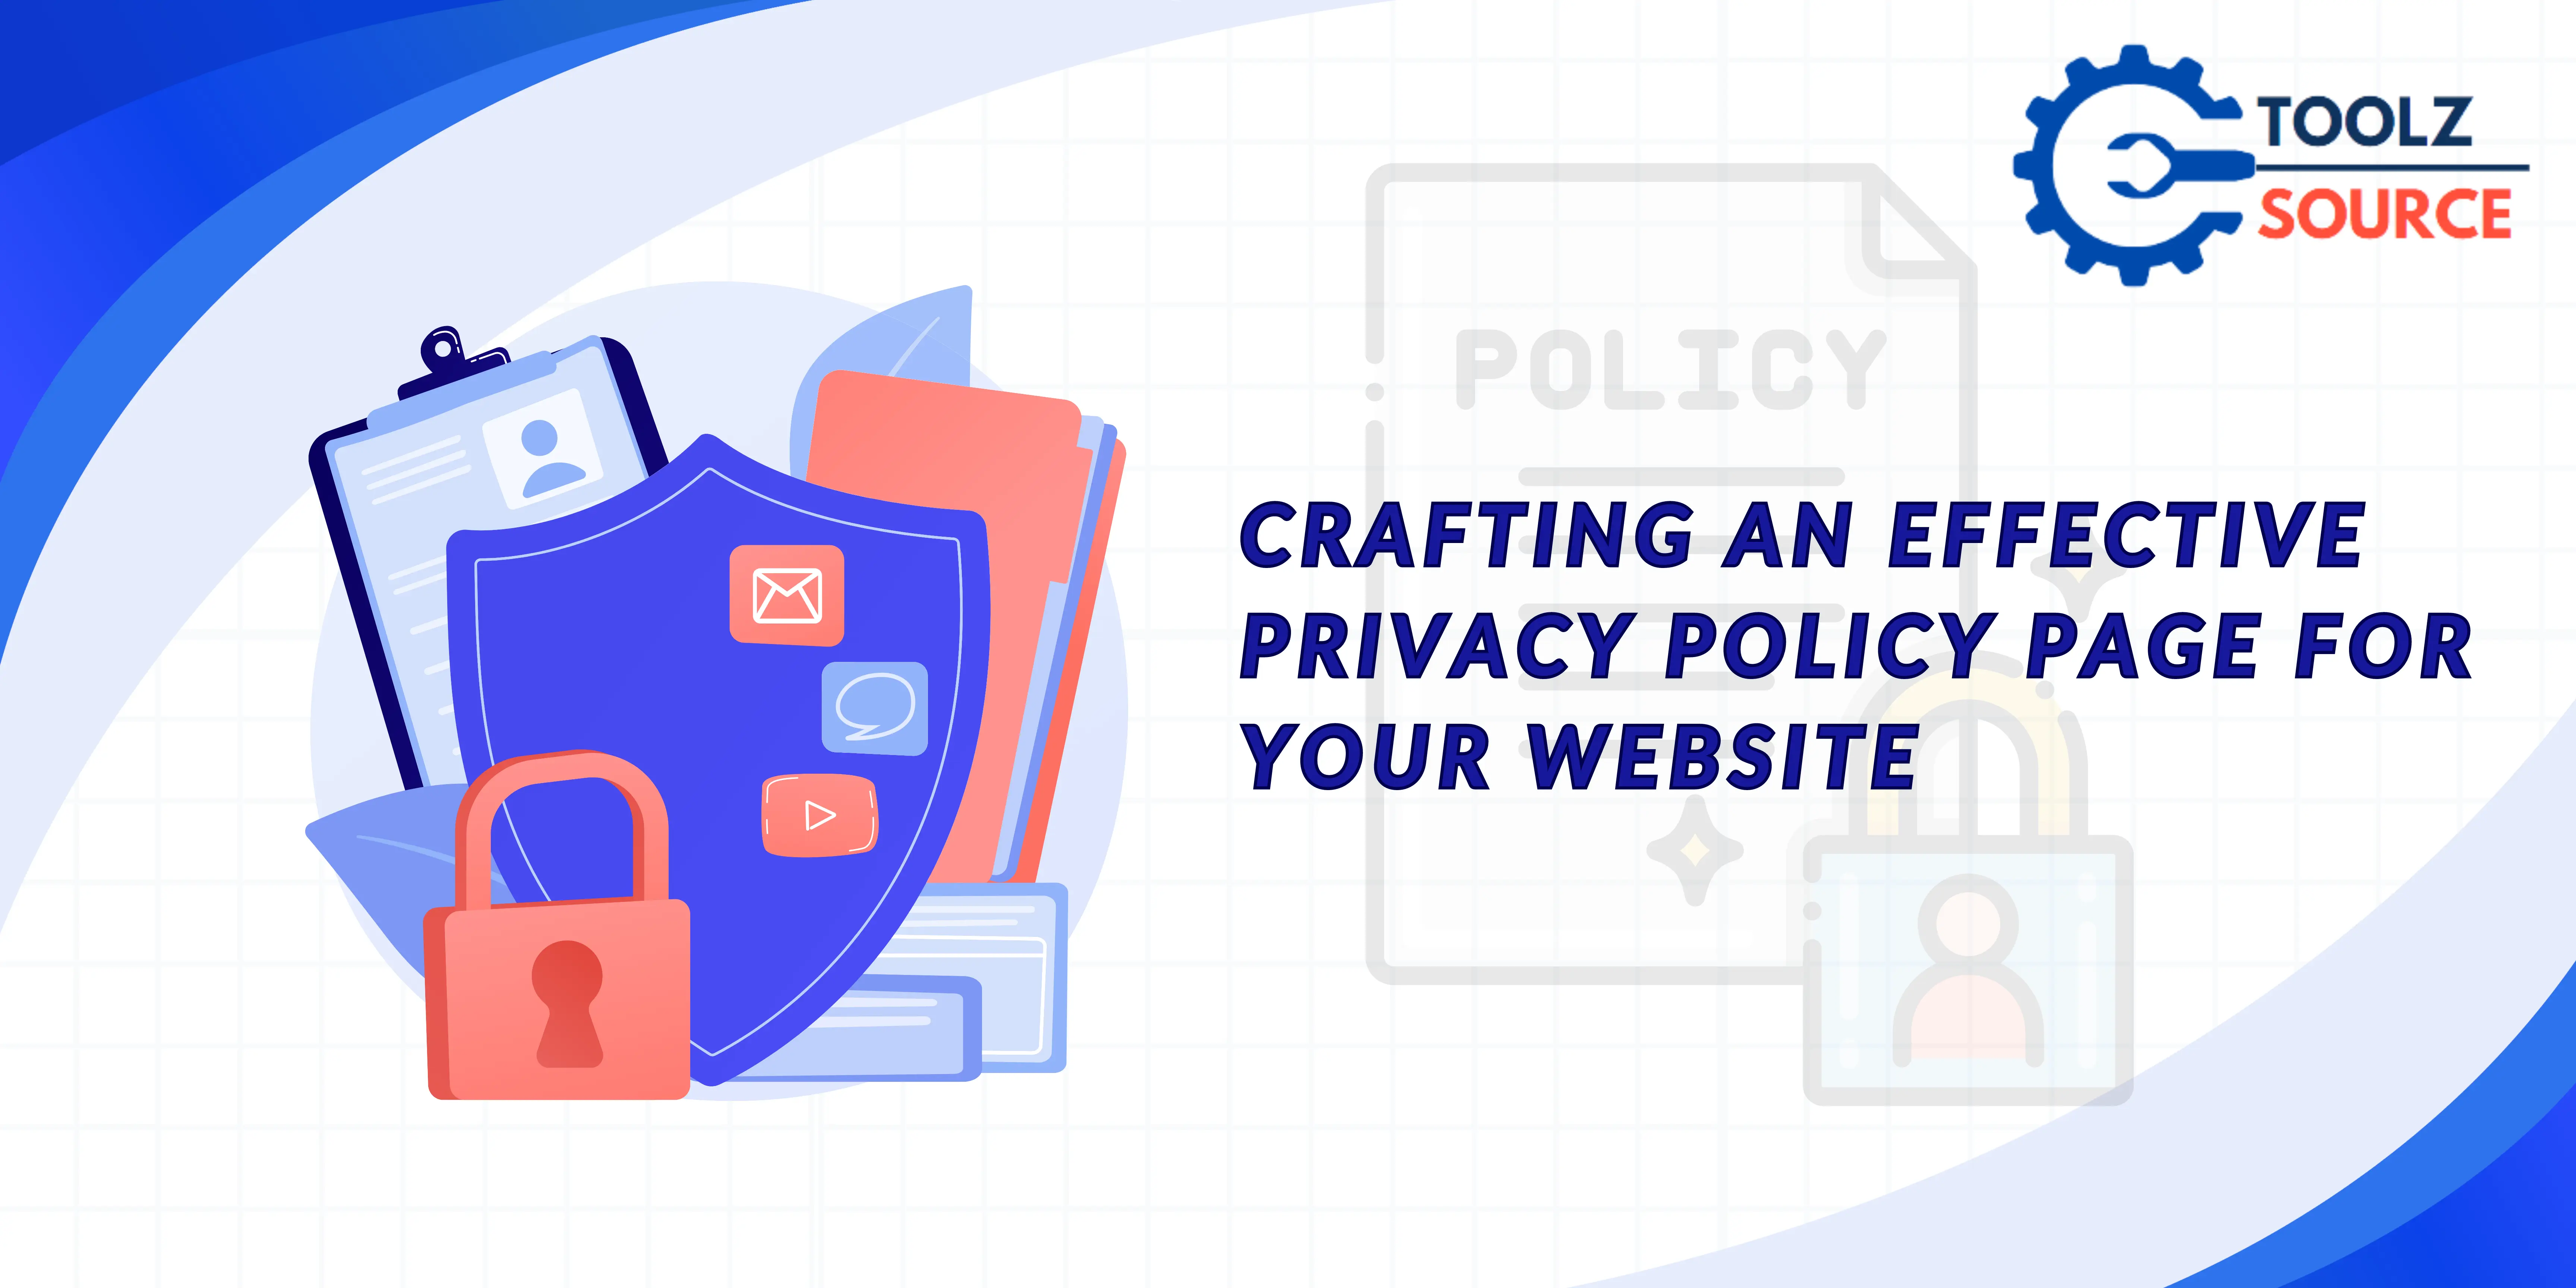 Crafting an Effective Privacy Policy Page for Your Website